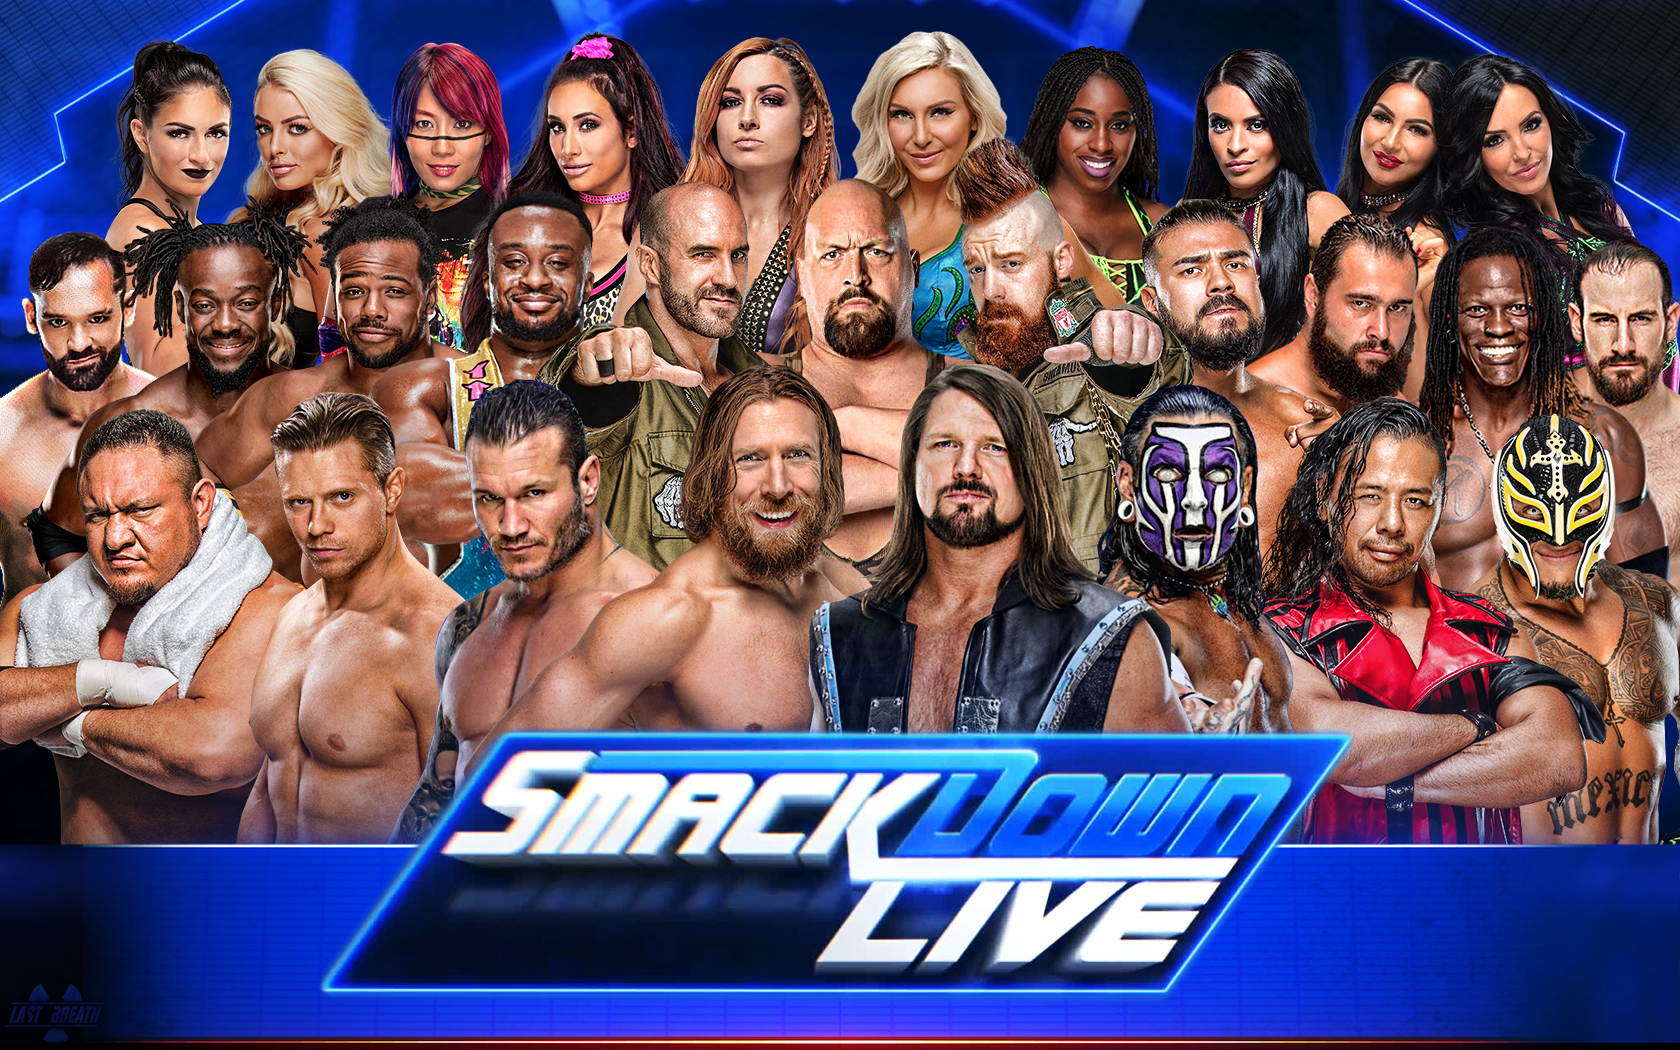 Wwe Smackdown Live Background